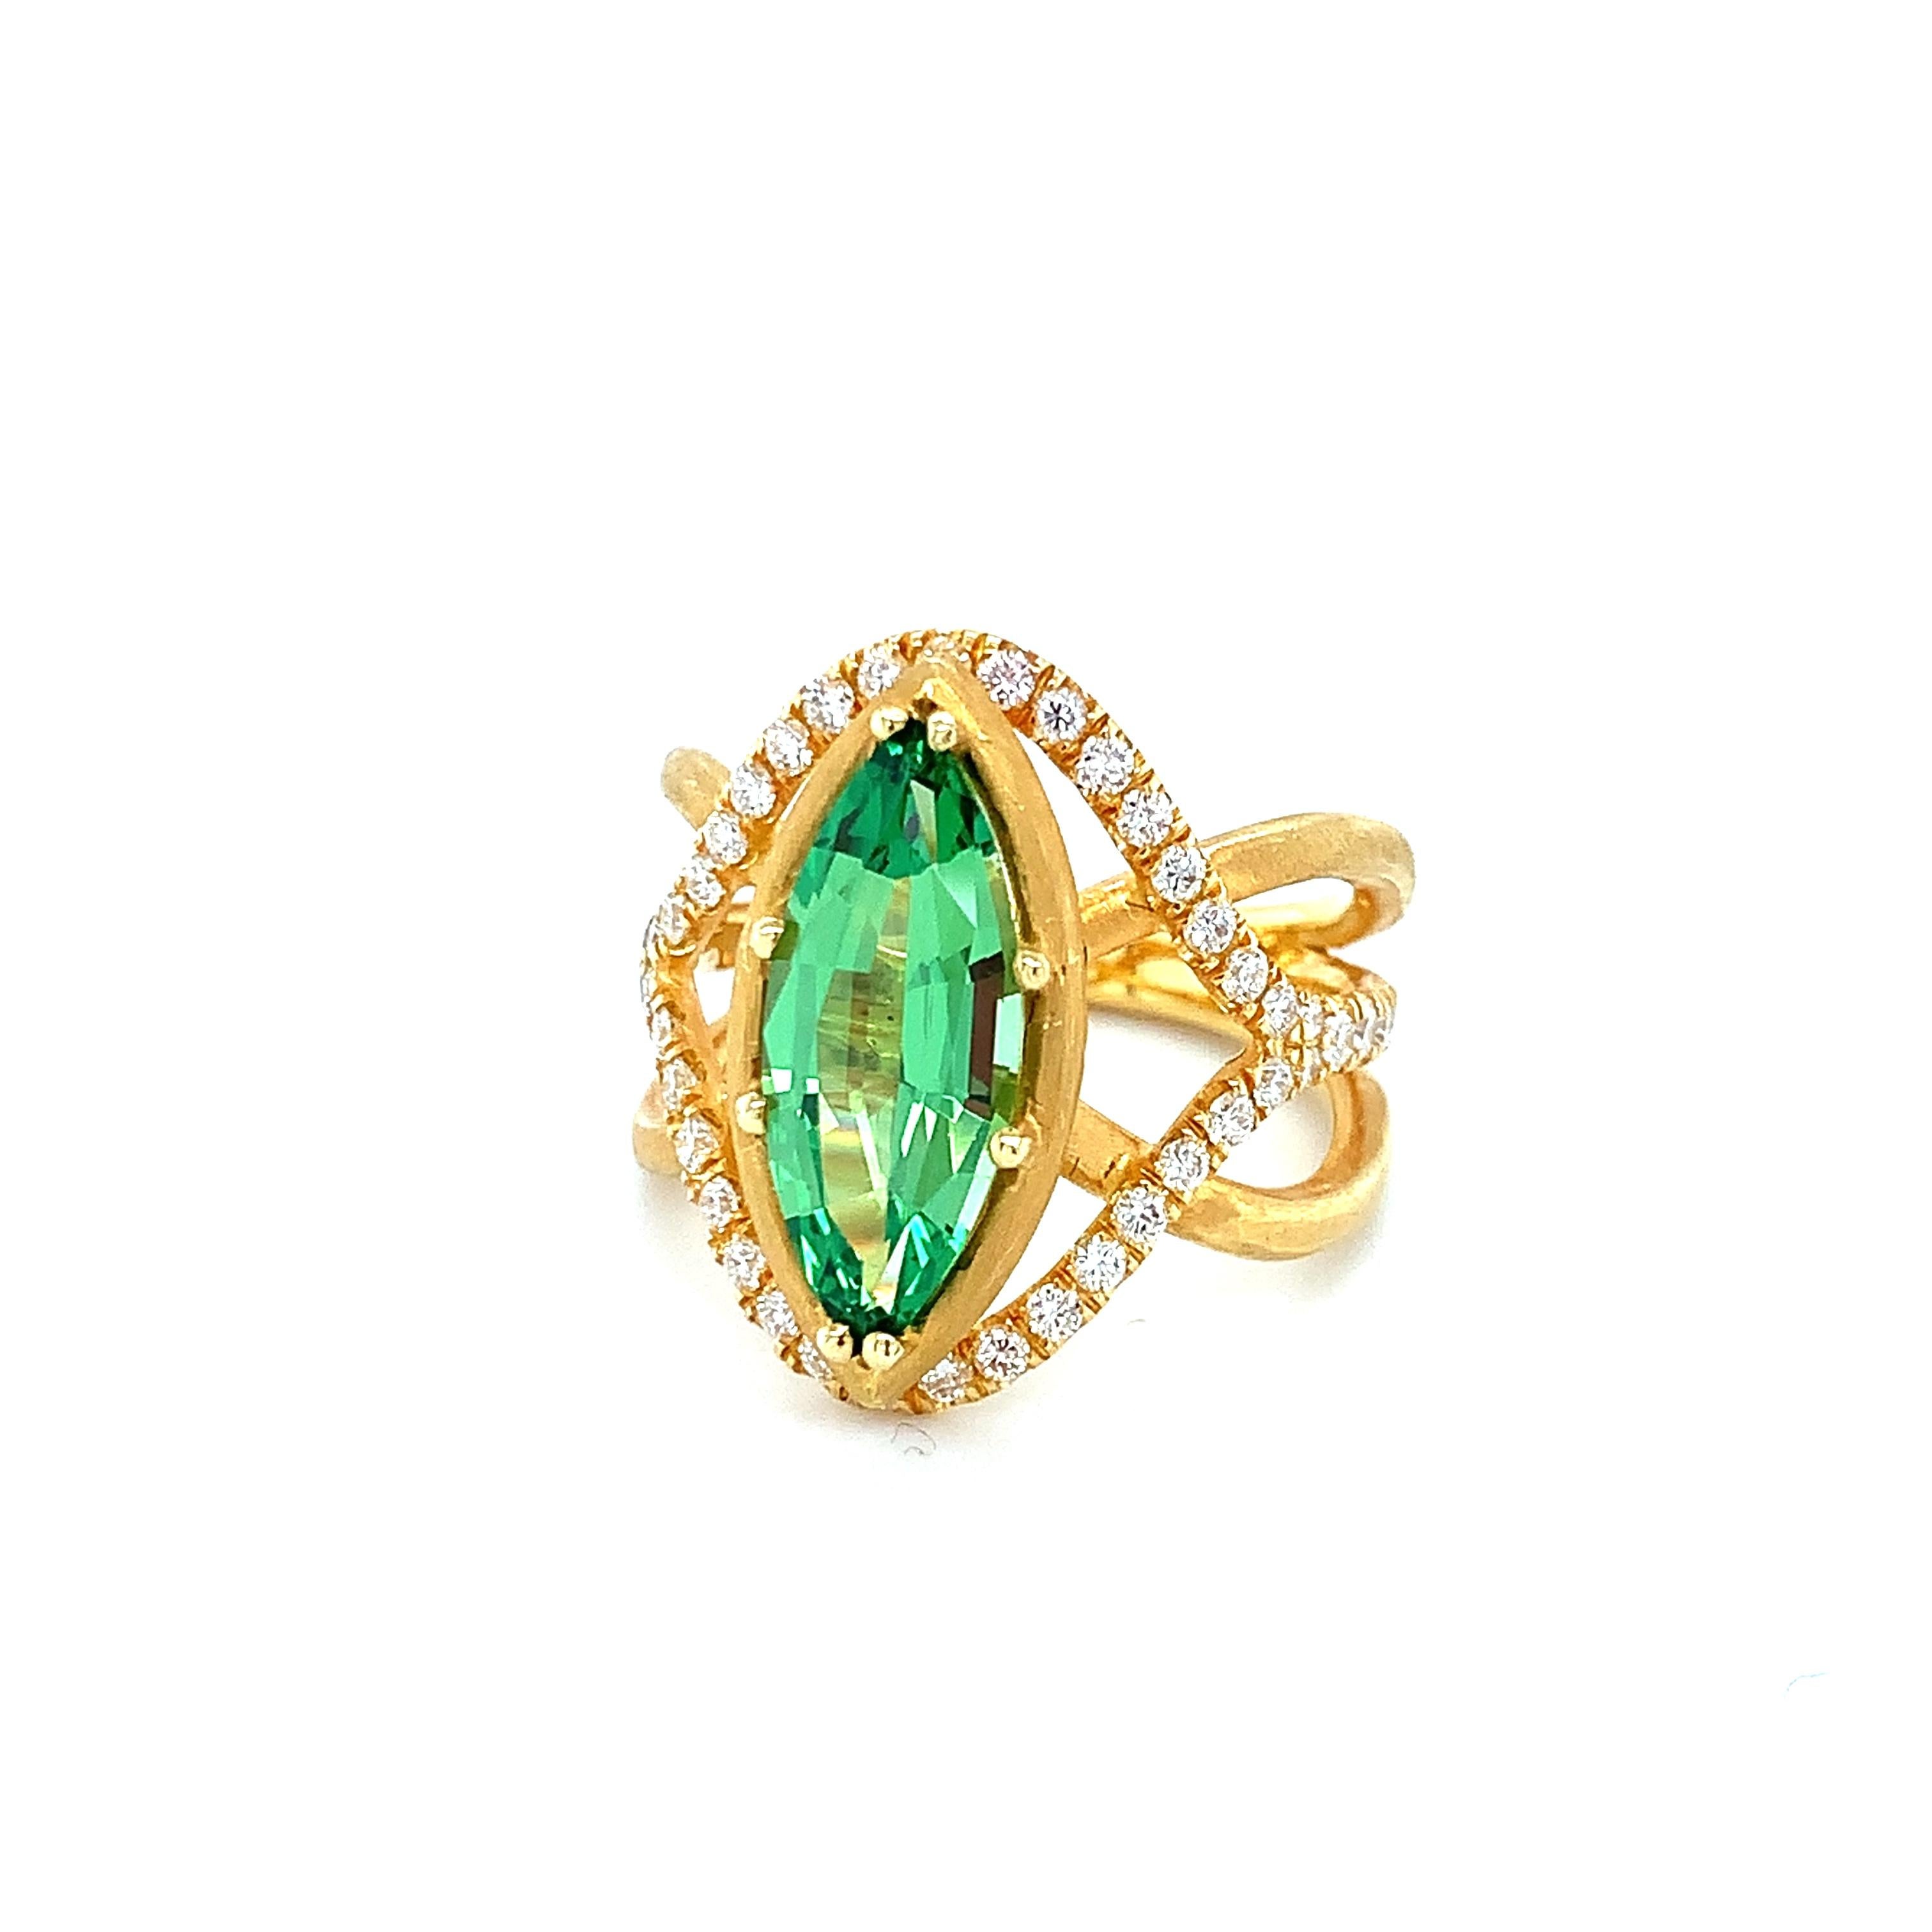 Tsavorite Garnet and Diamond Cocktail Ring in Yellow Gold, 2.95 Carats For Sale 2